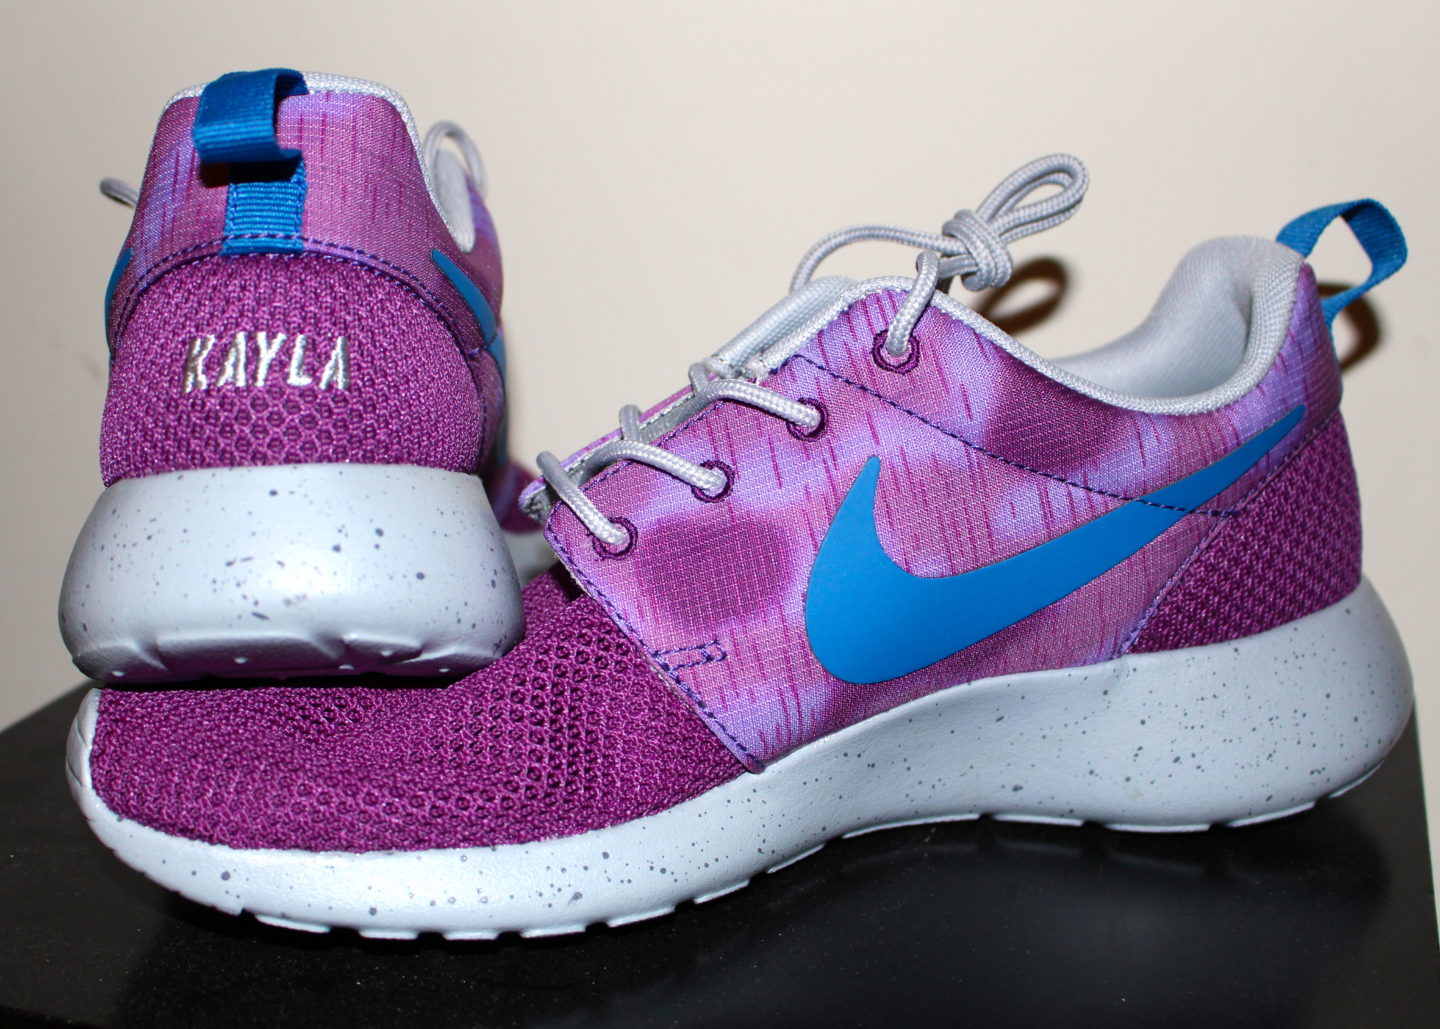 Nike ID Review: Custom Roshes - Kayla's Chaos